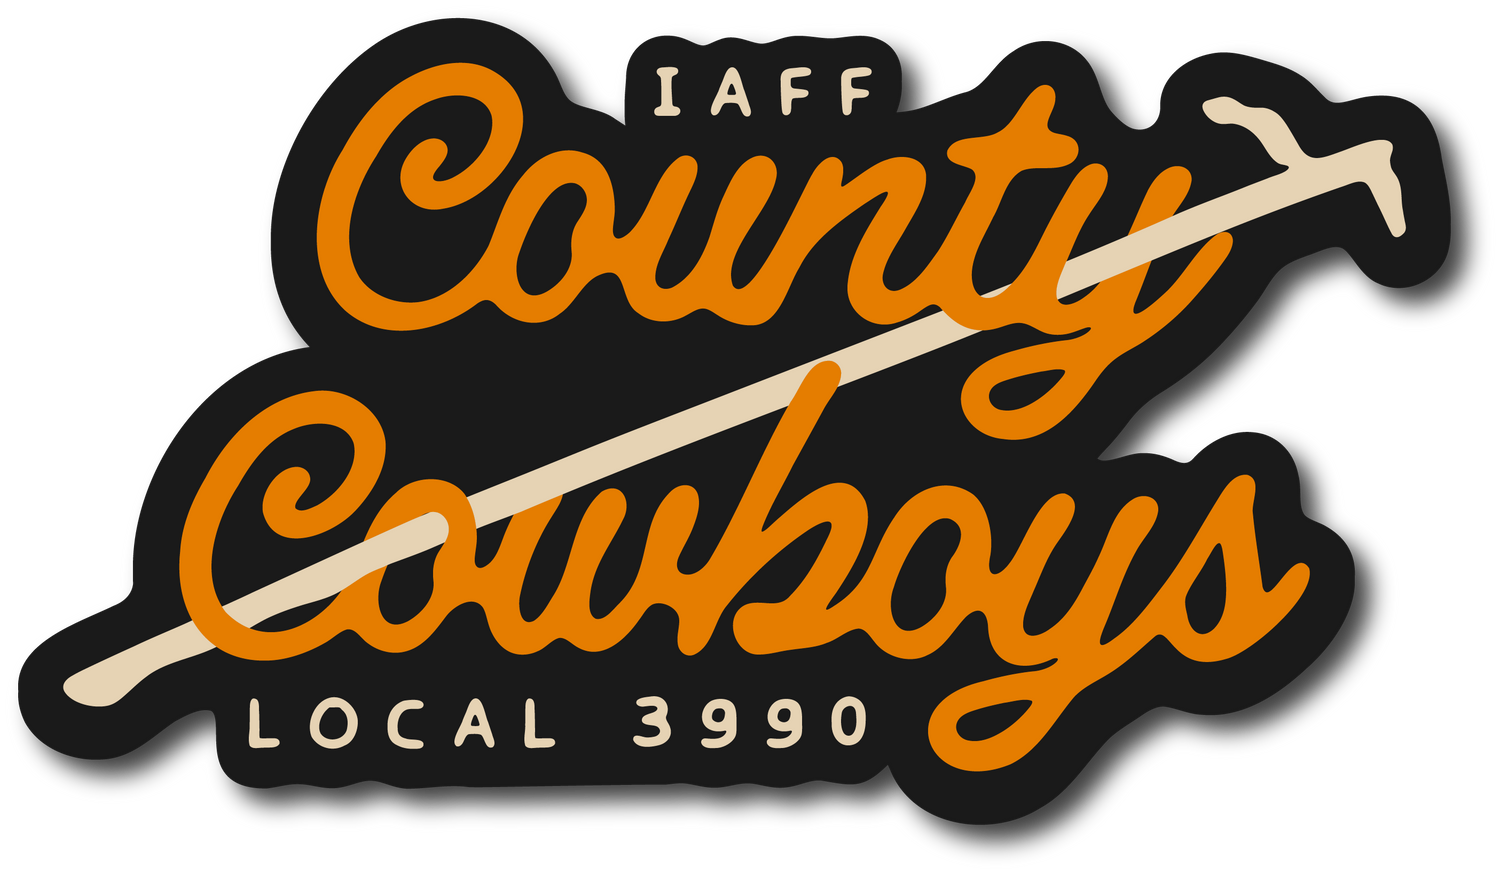 Local 3990 &quot;County Cowboys&quot; Decal